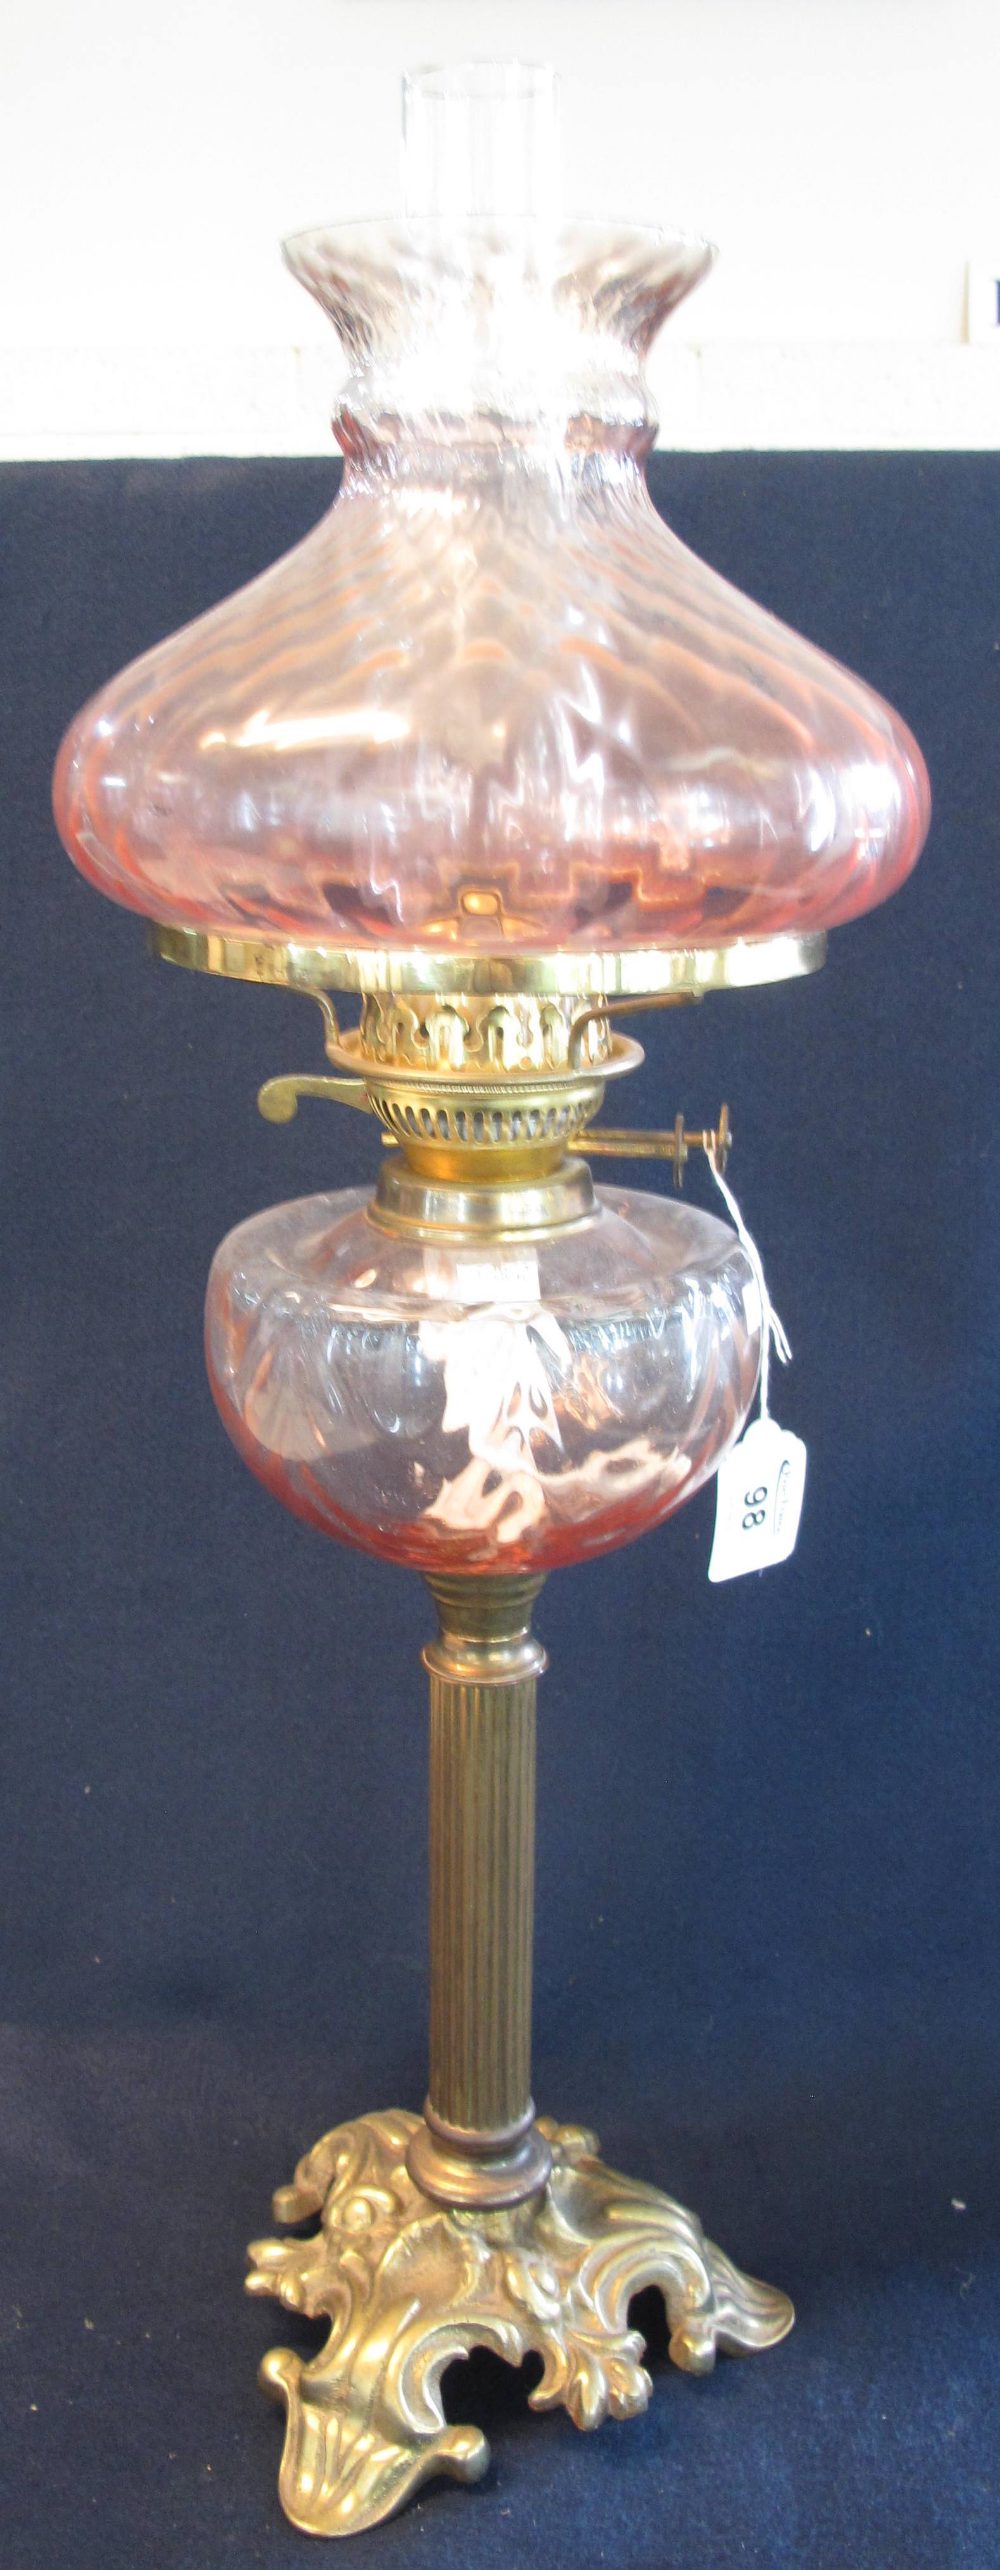 Brass double burner oil lamp with glass reservoir and brass pedestal base with a coloured glass - Image 2 of 2